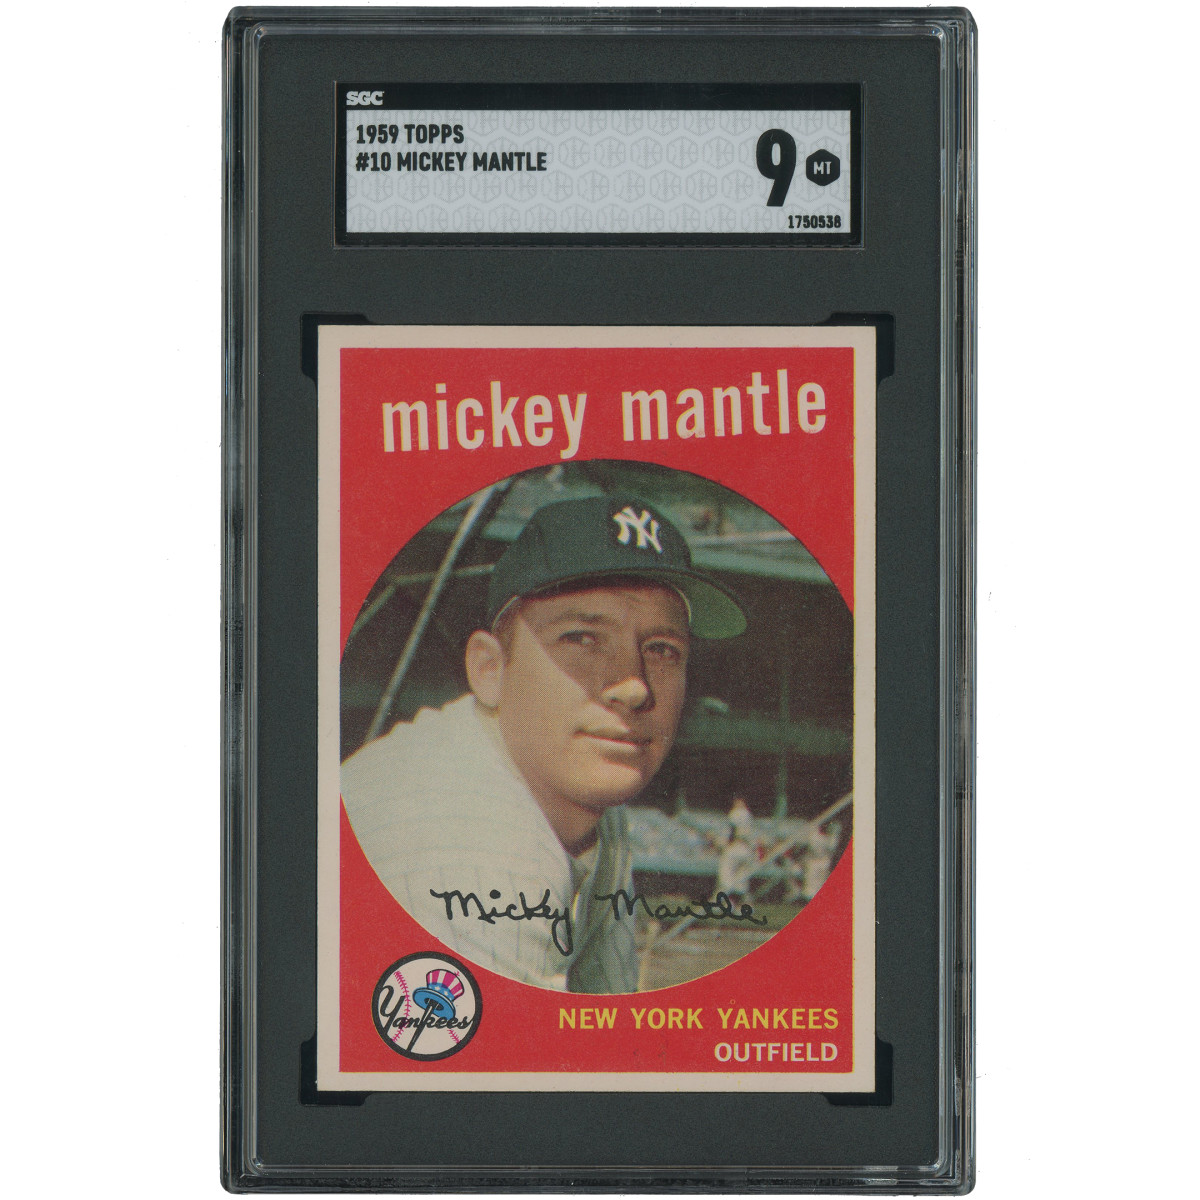 1959 Topps Mickey Mantle card.